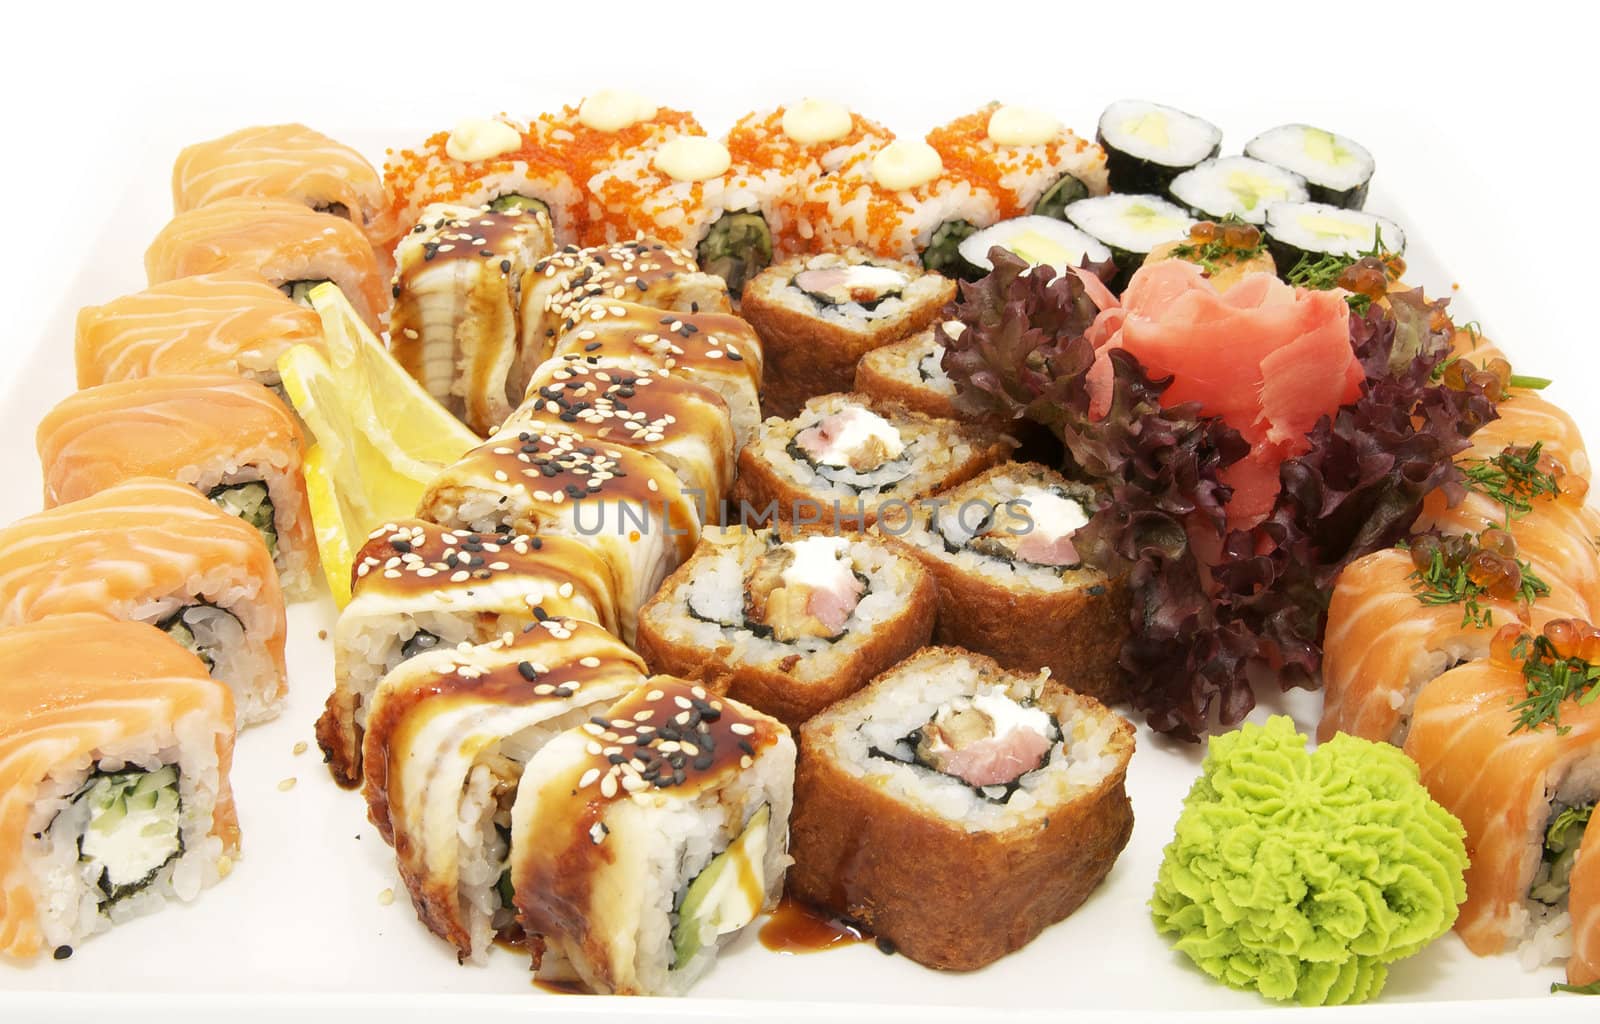 large assortment of sushi, fish and eggs at a Japanese restaurant